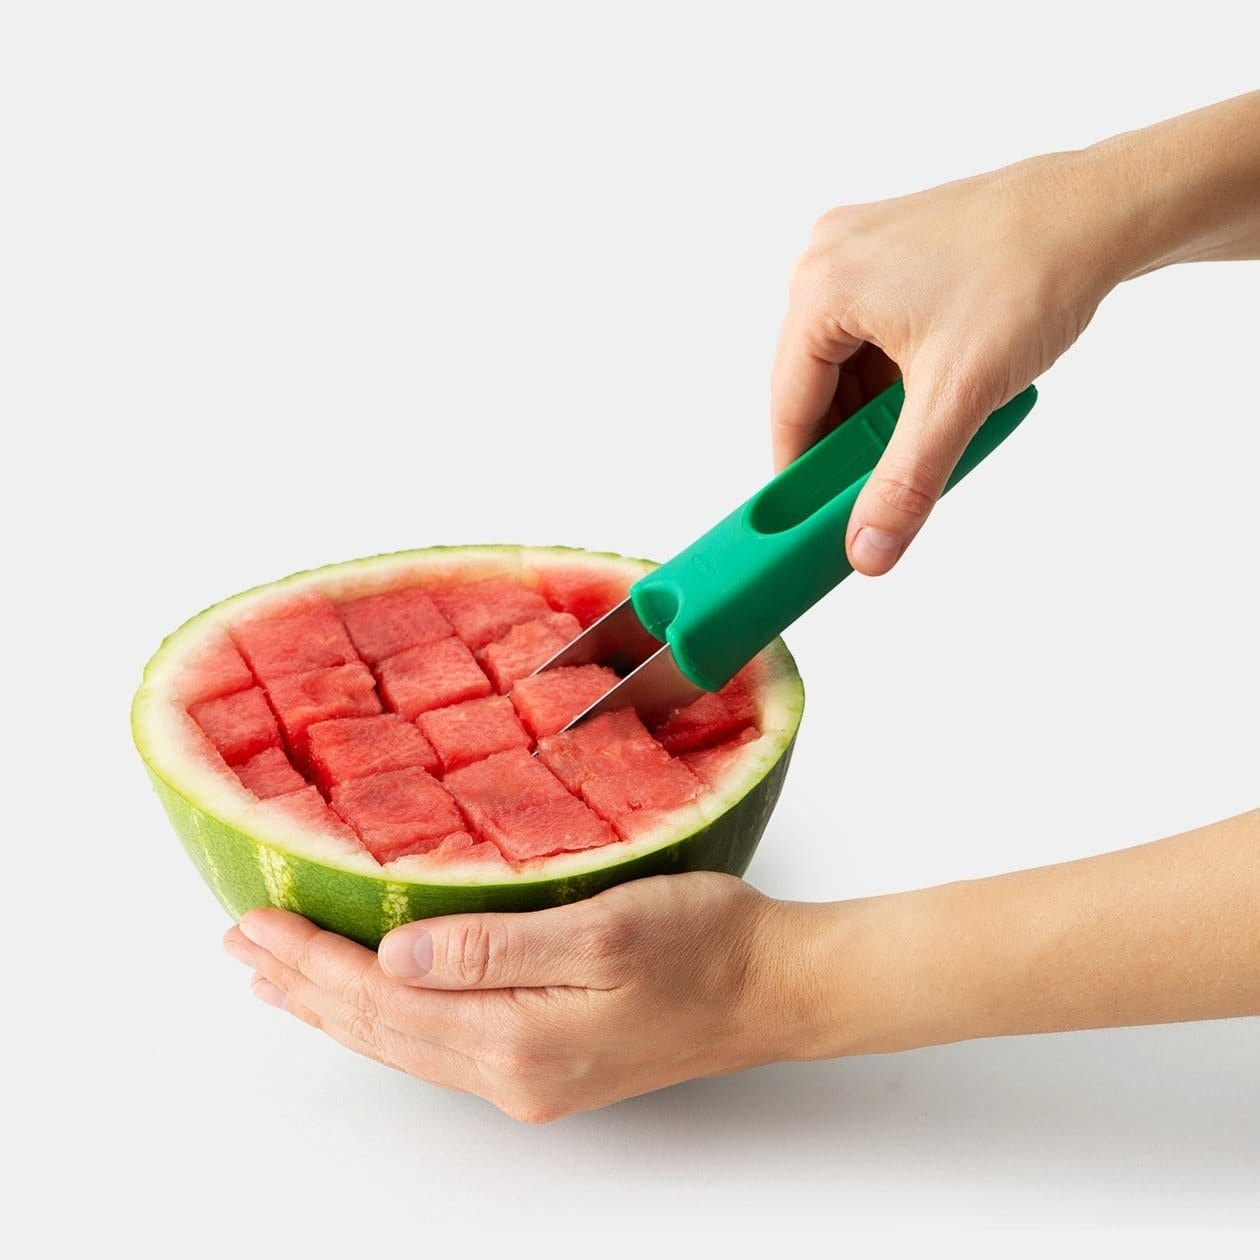 Chef'n Slicester Watermelon Tool